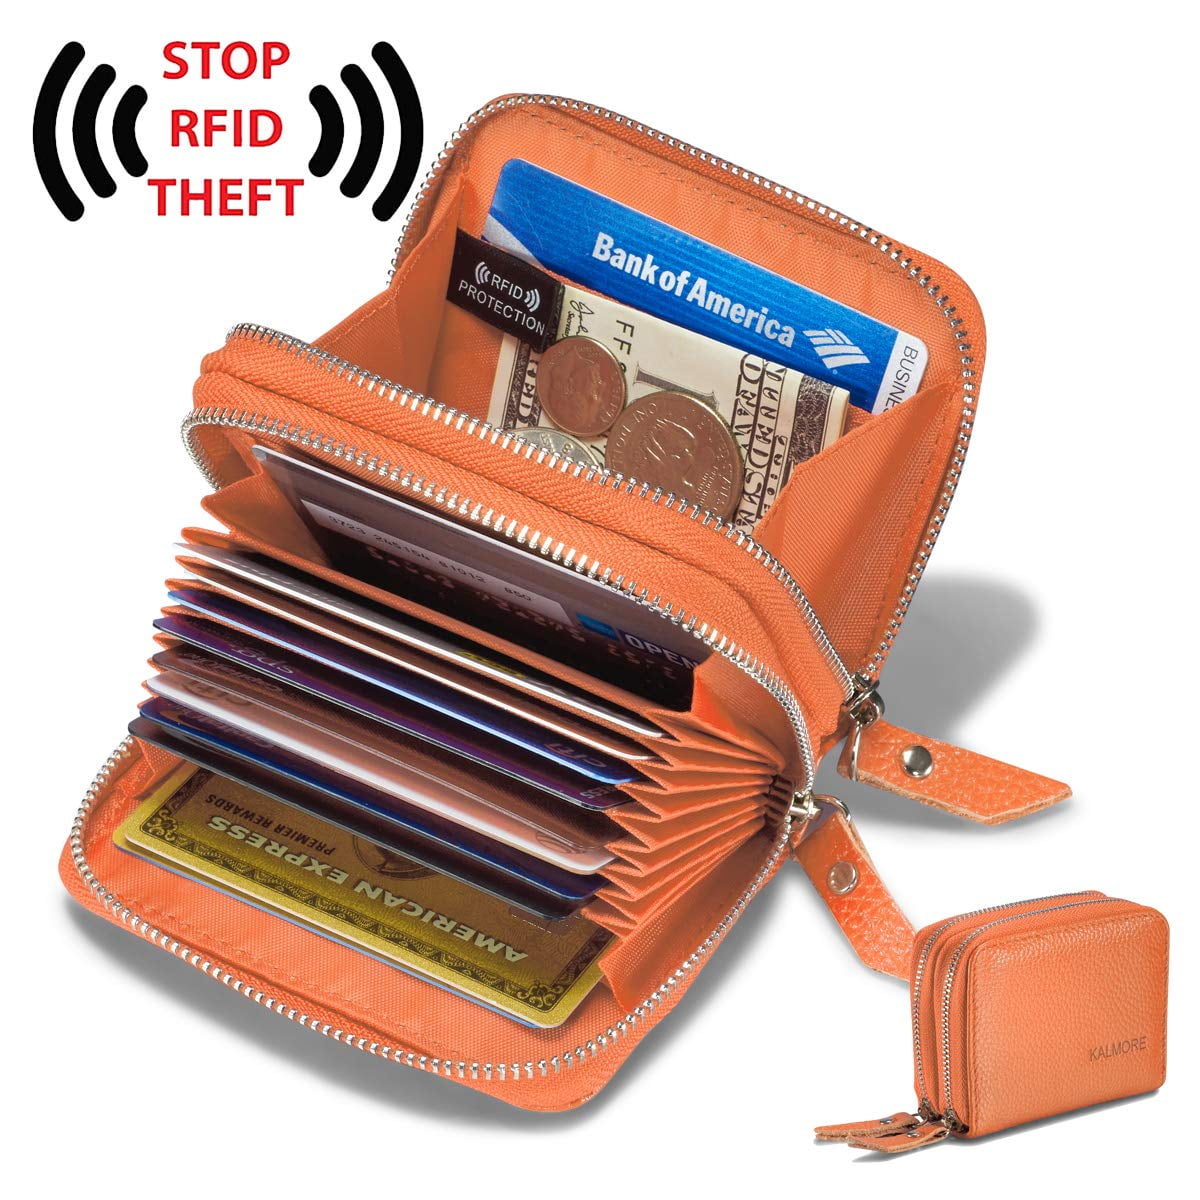 HIDENTITY DOUBLE RFID PROTECTIVE WALLET 